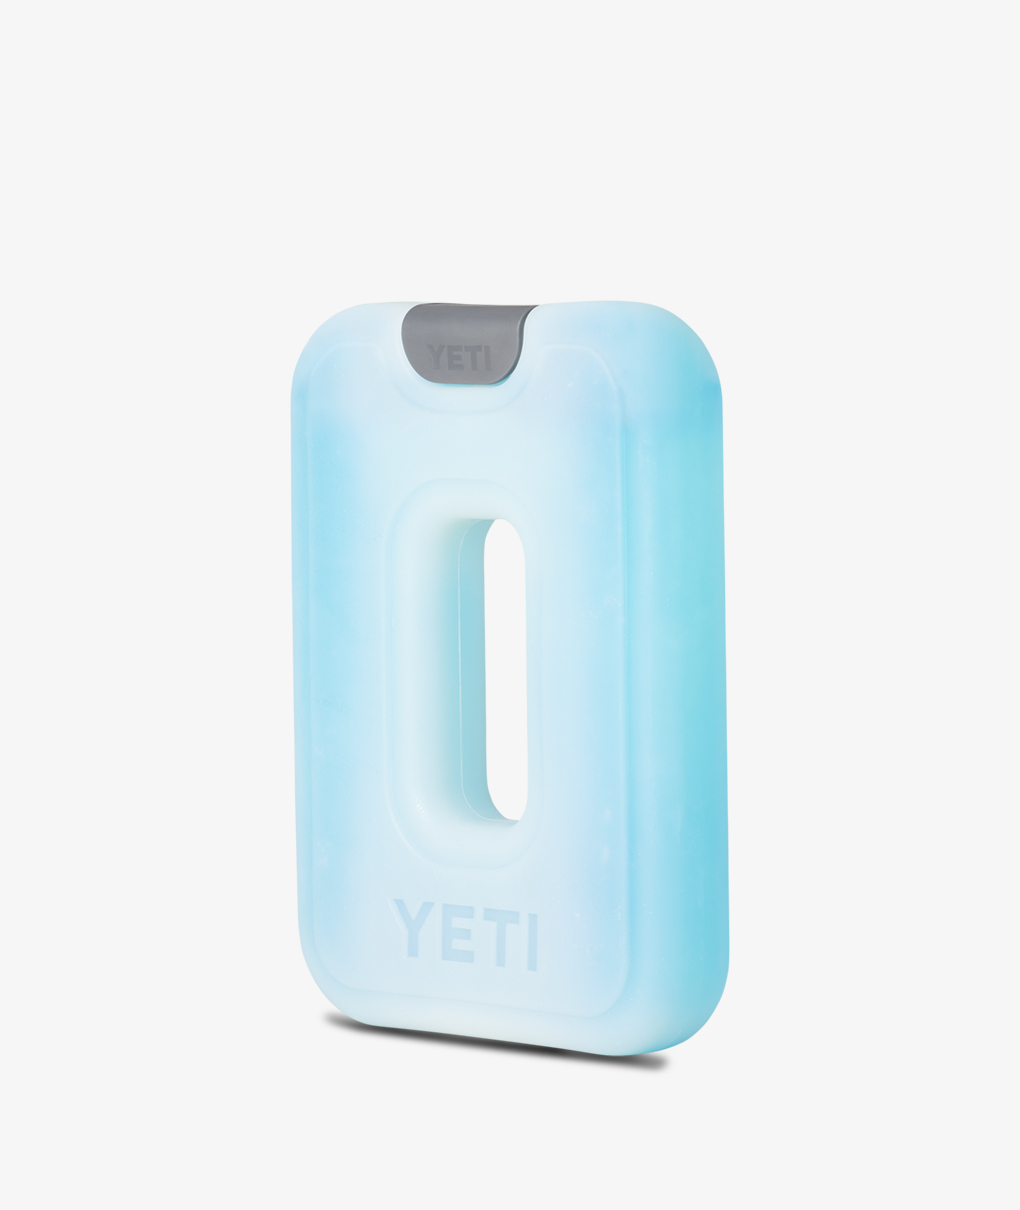 YETI thin ICE and what it fits 